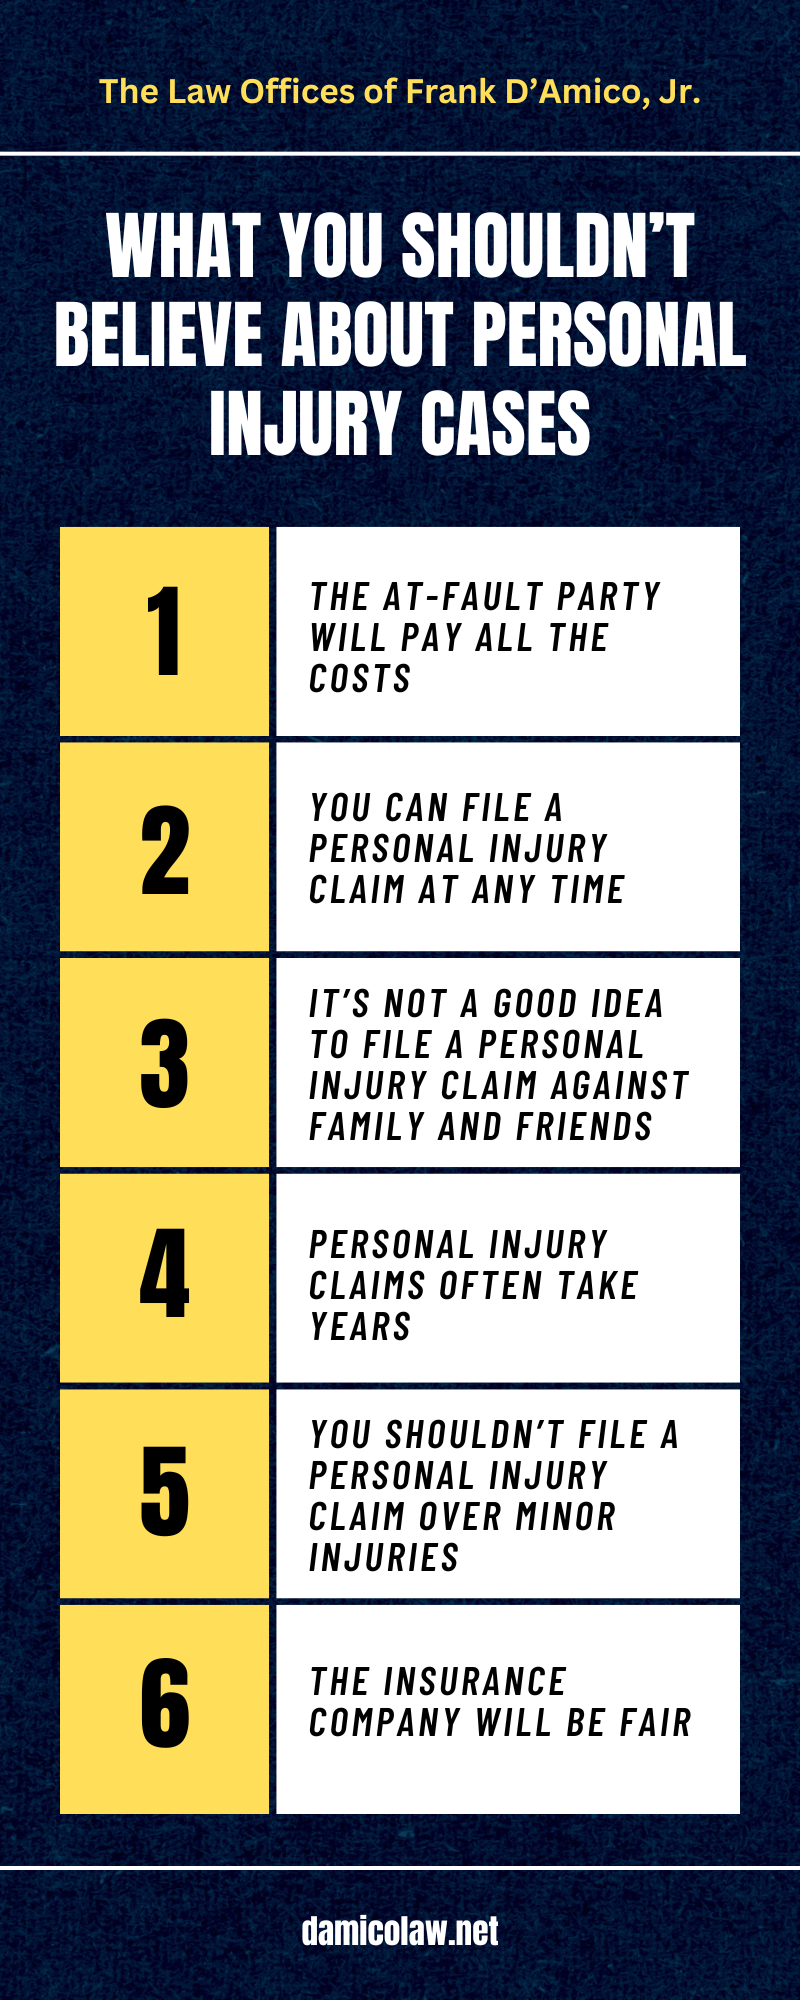 WHAT YOU SHOULDN'T BELIEVE ABOUT PERSONAL INJURY CASES